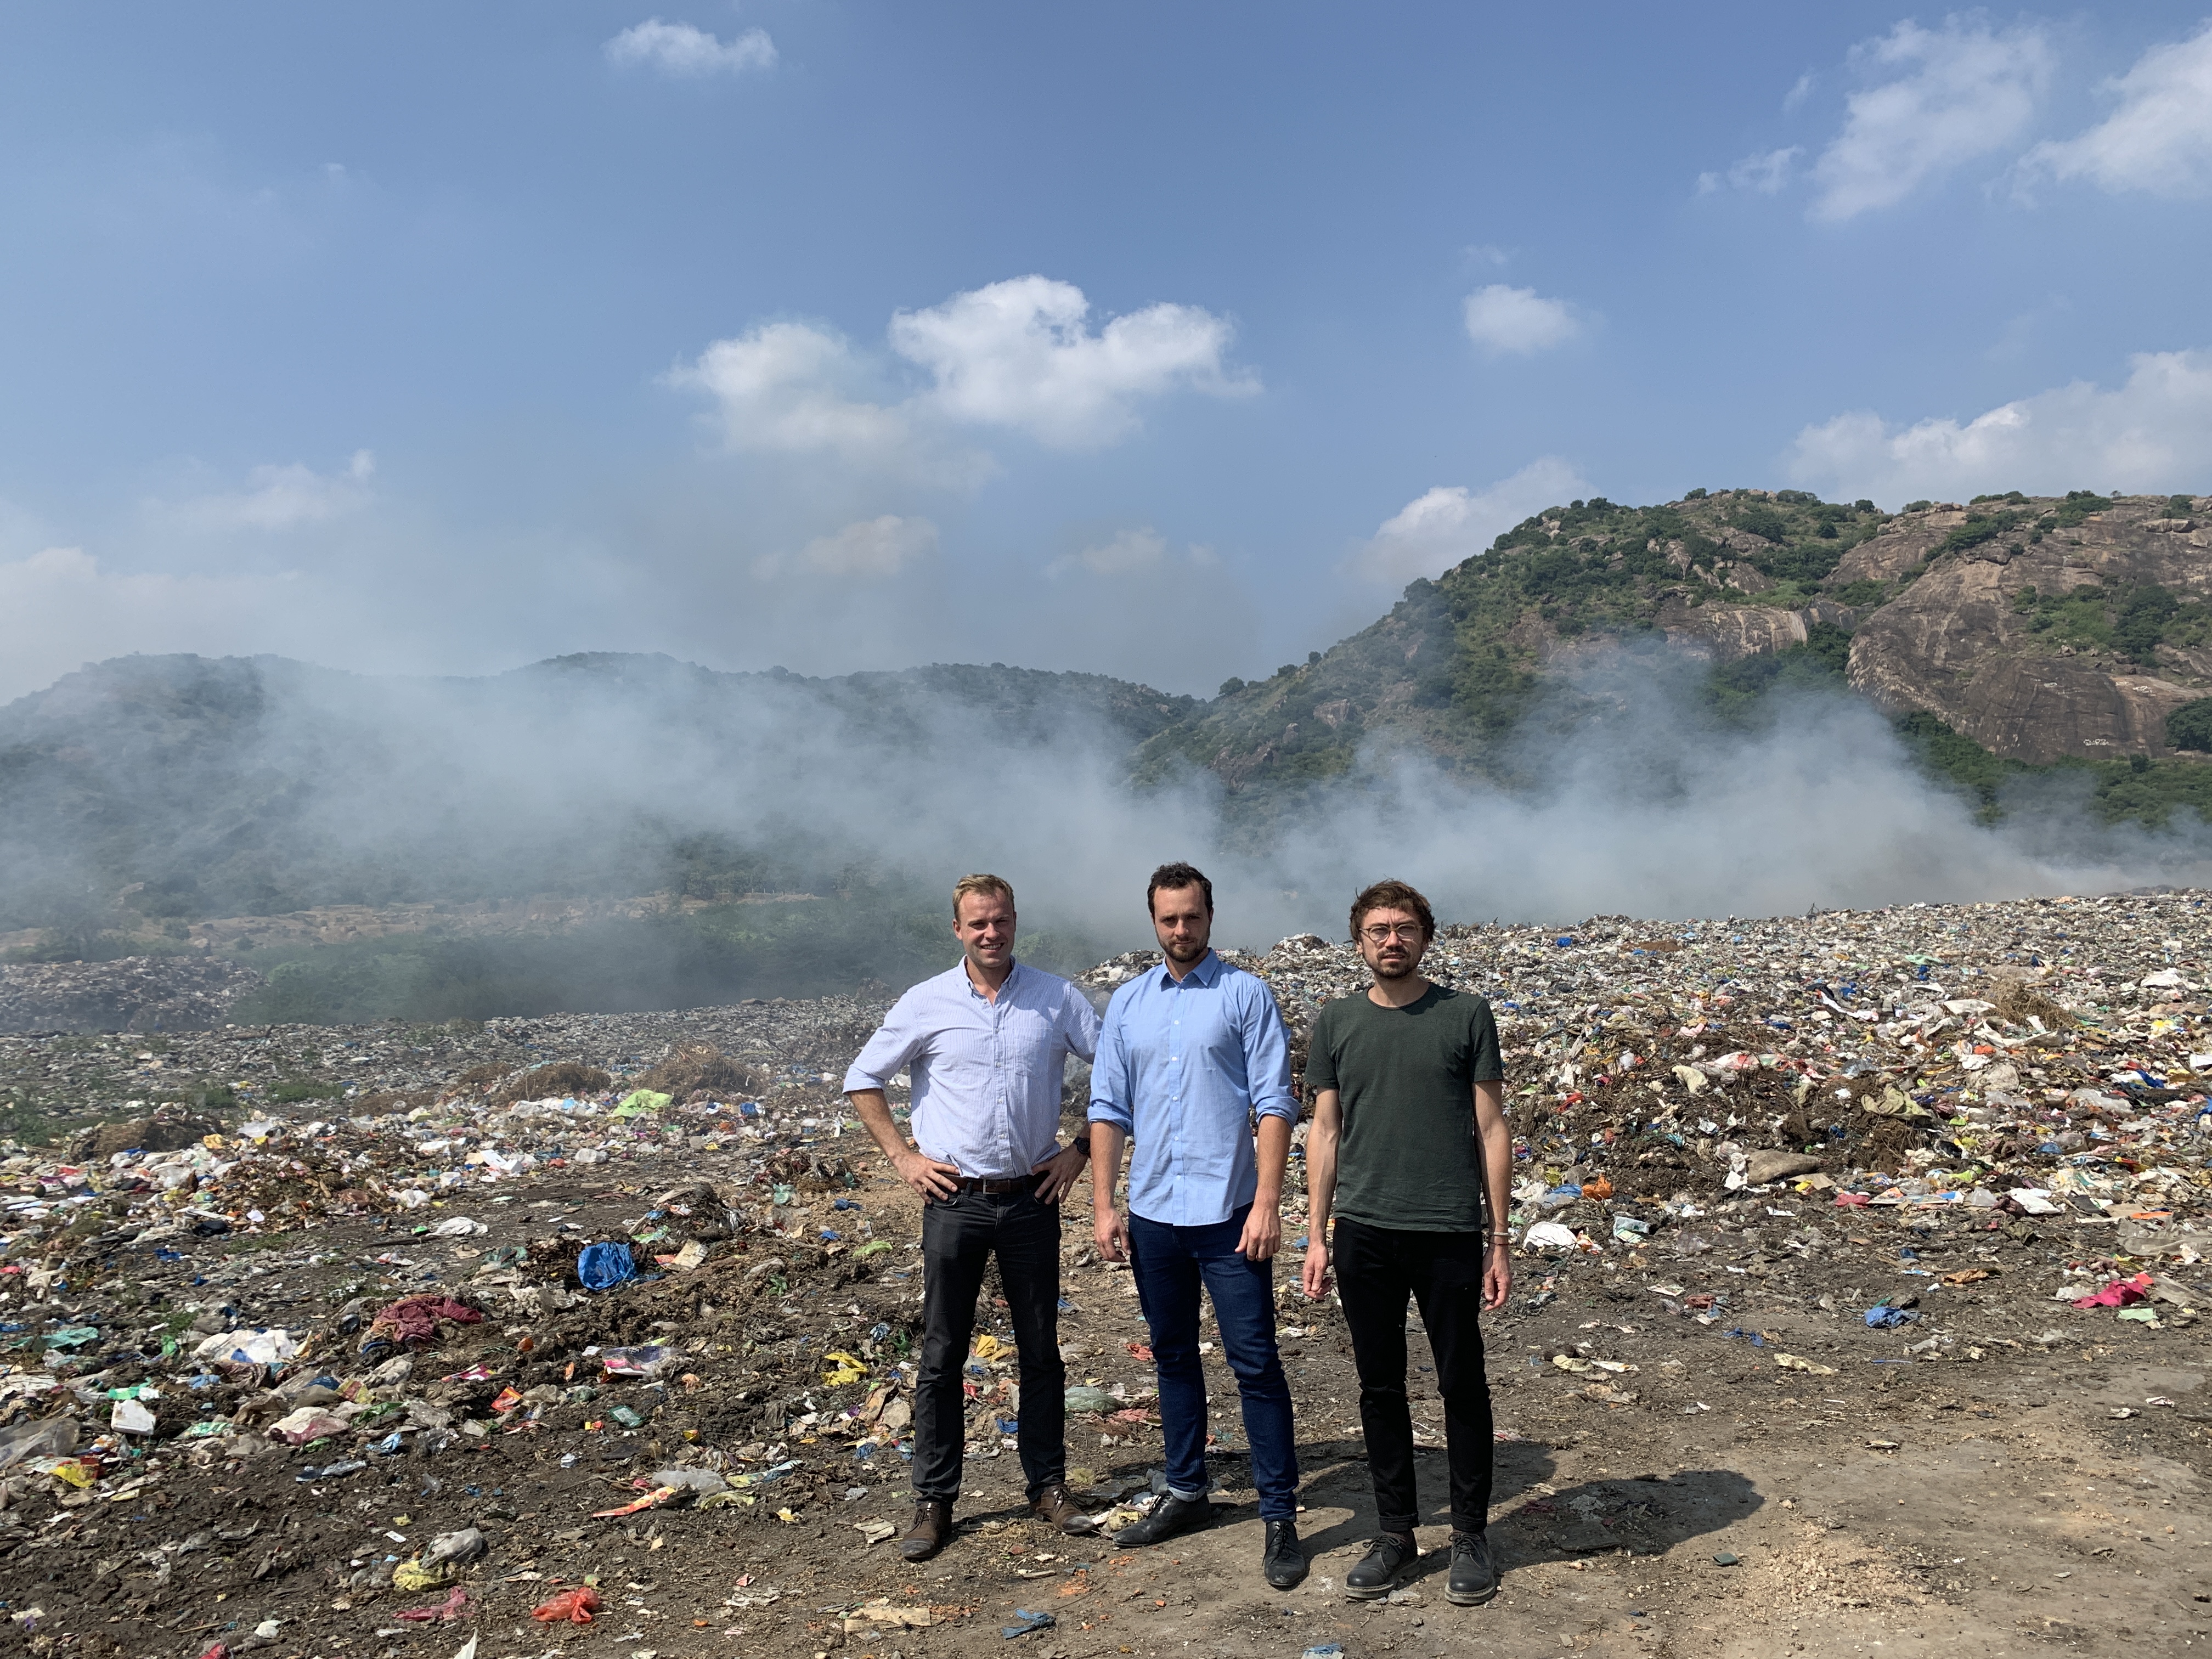 A landfill in India